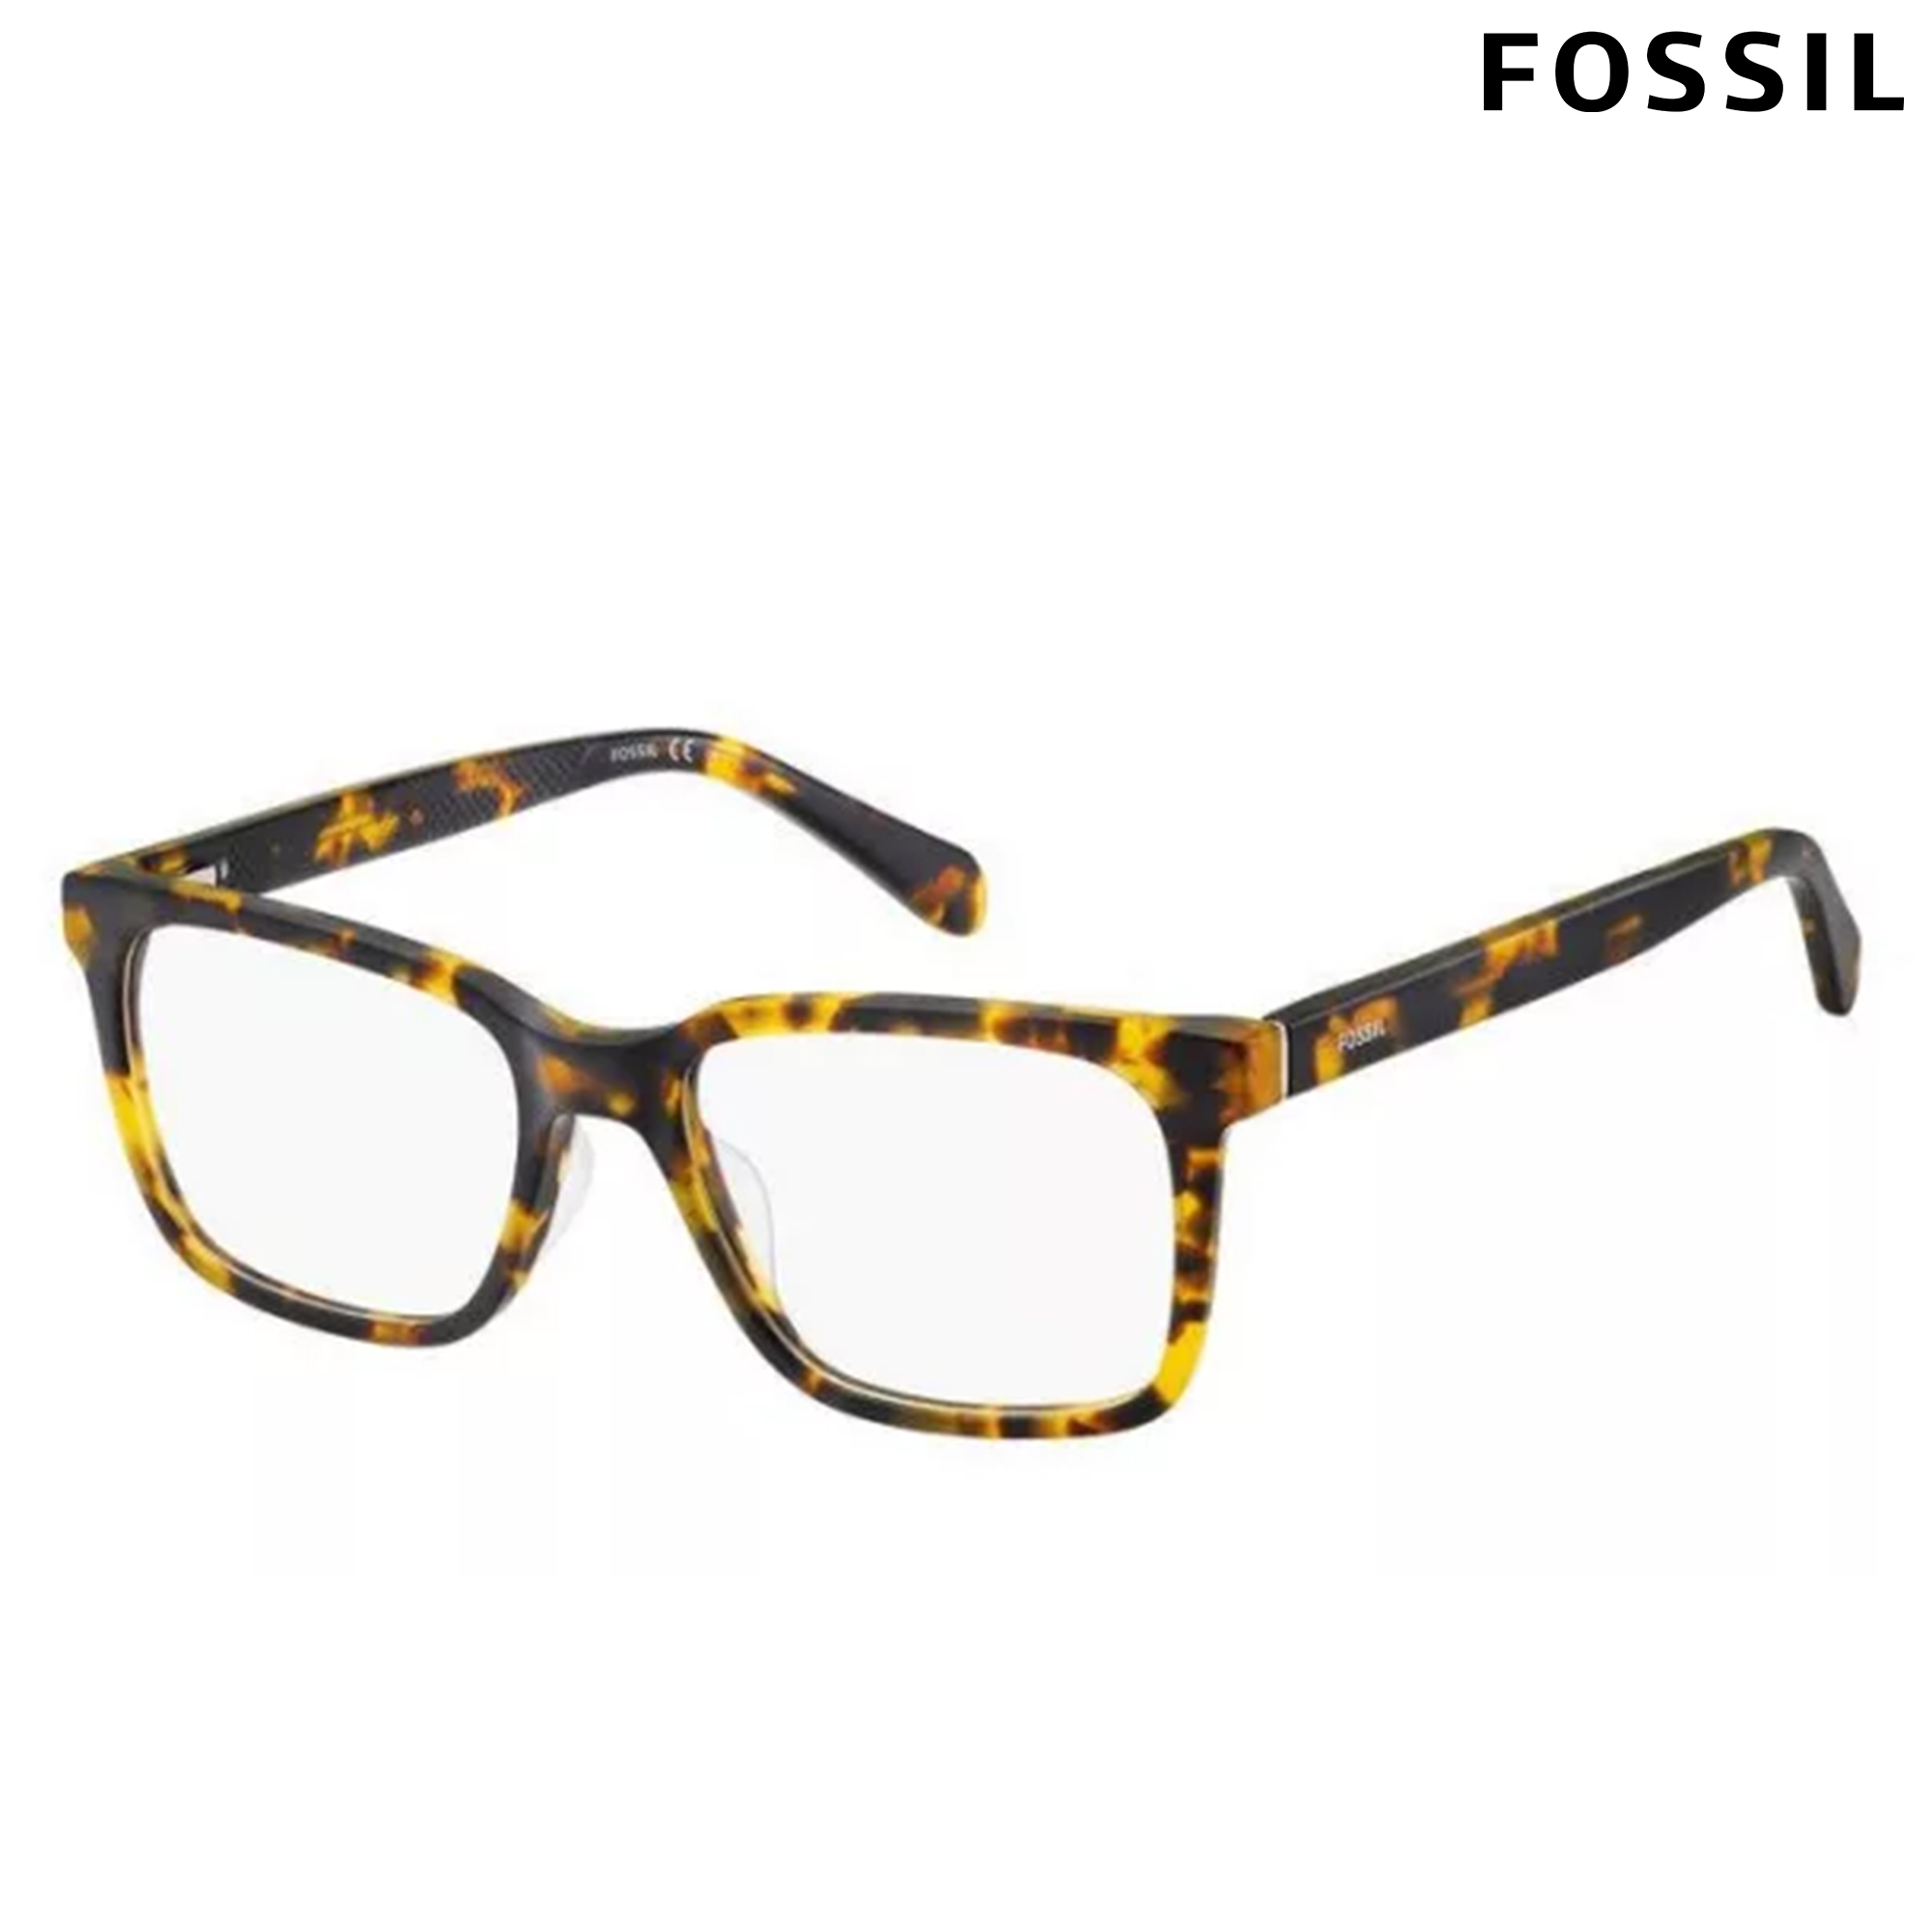 FOSSIL FOS 7062 086 01